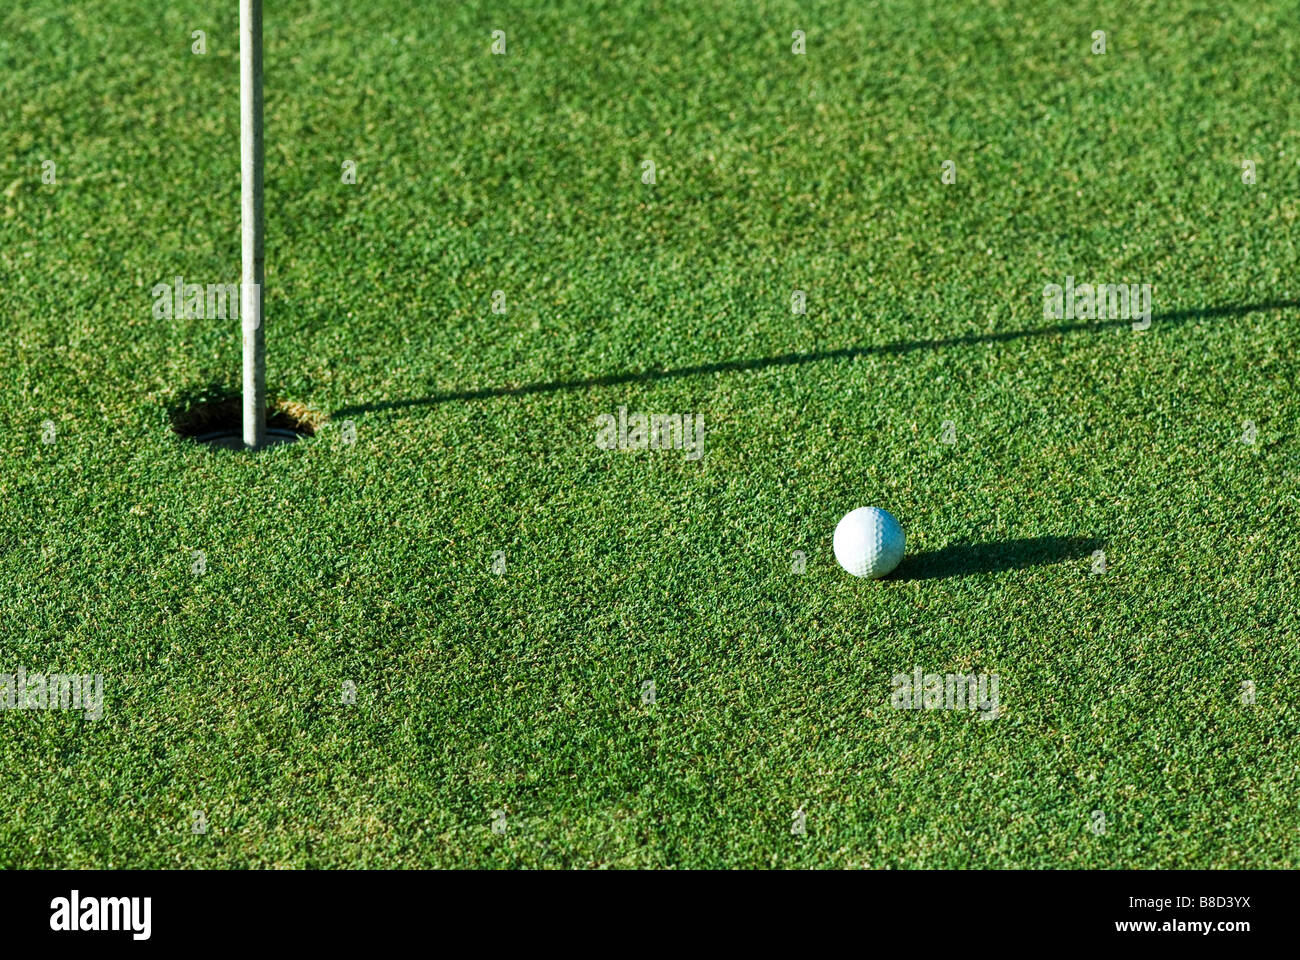 A golf ball a short putt away from the hole with the flag still in it Stock Photo